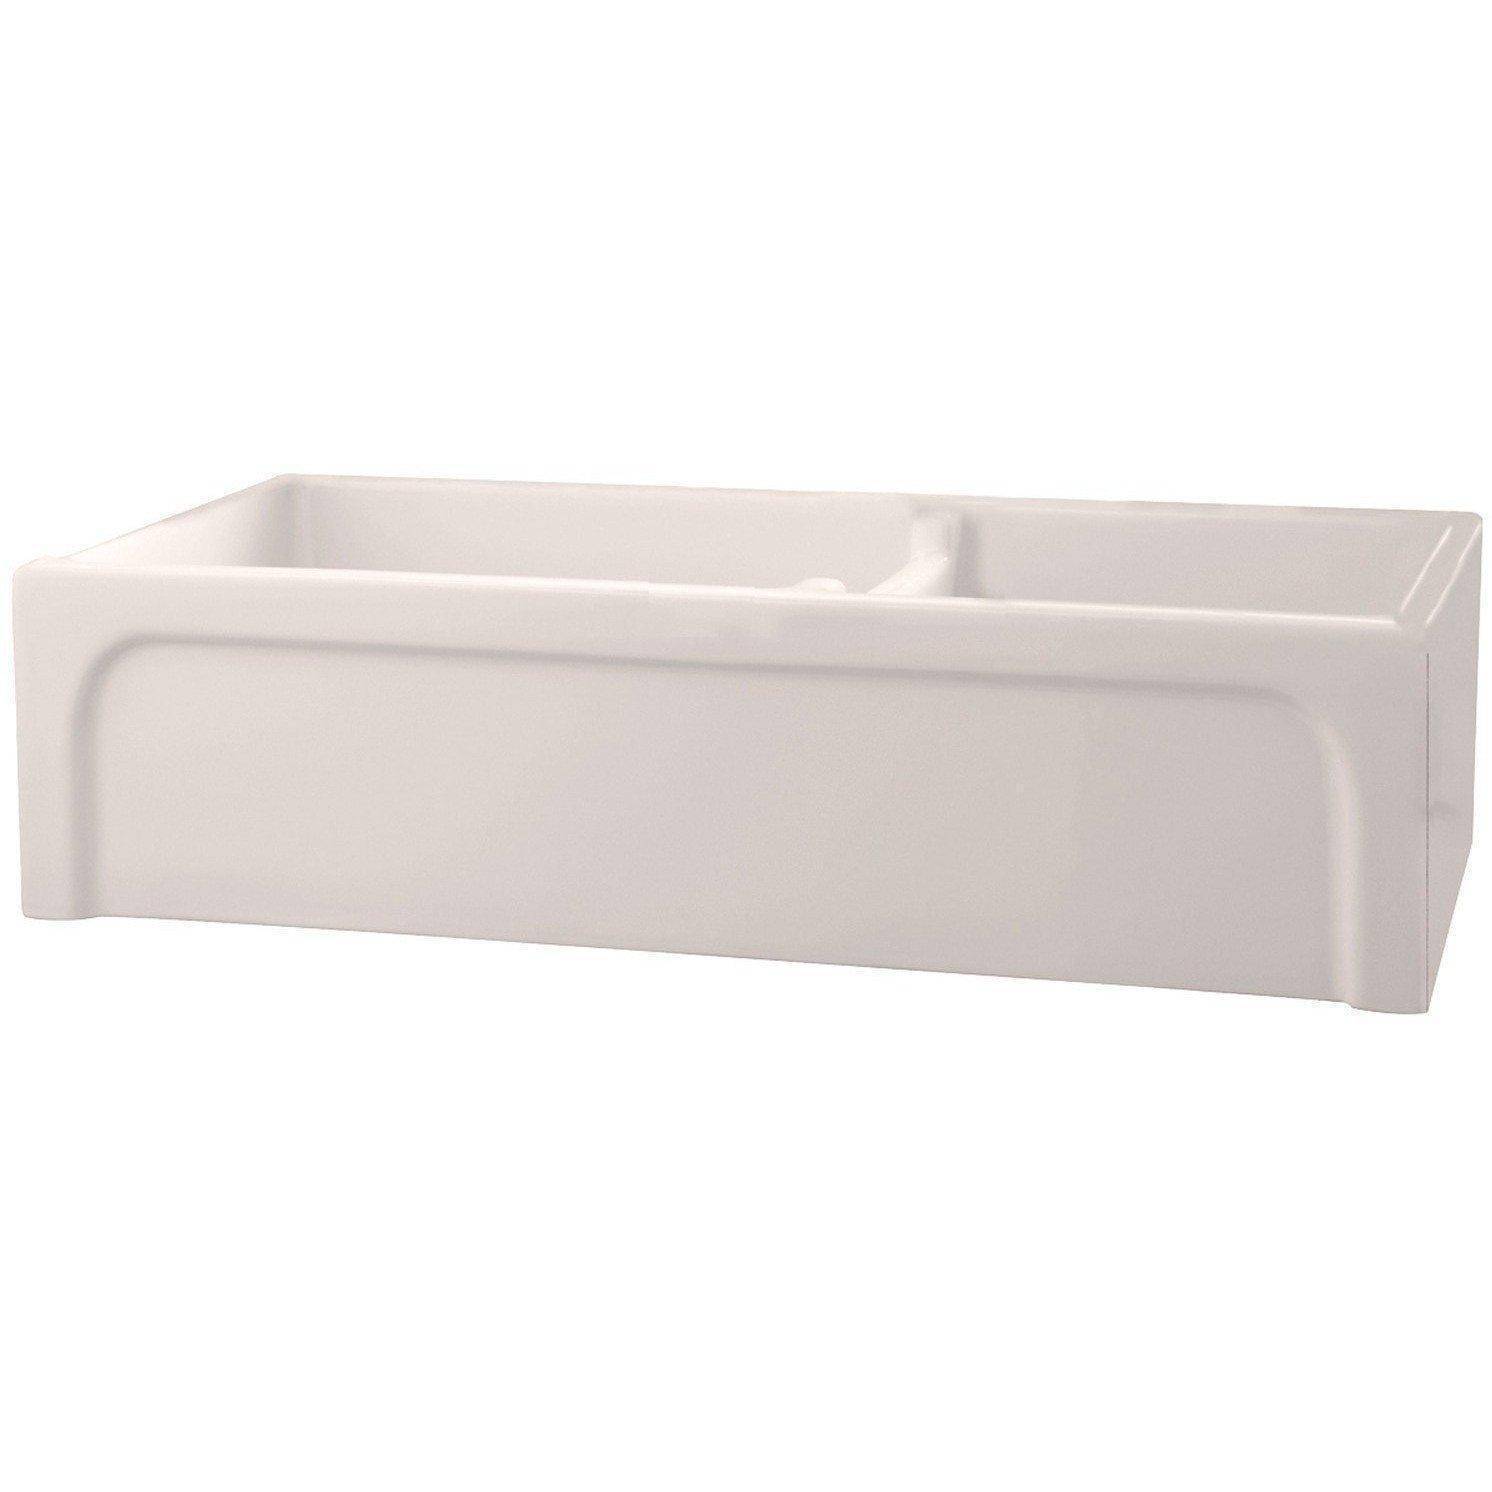 Barclay FSDB1554 Millwood 36" Fireclay Double Bowl Farmhouse Kitchen Sink with Arched Apron - Annie & Oak